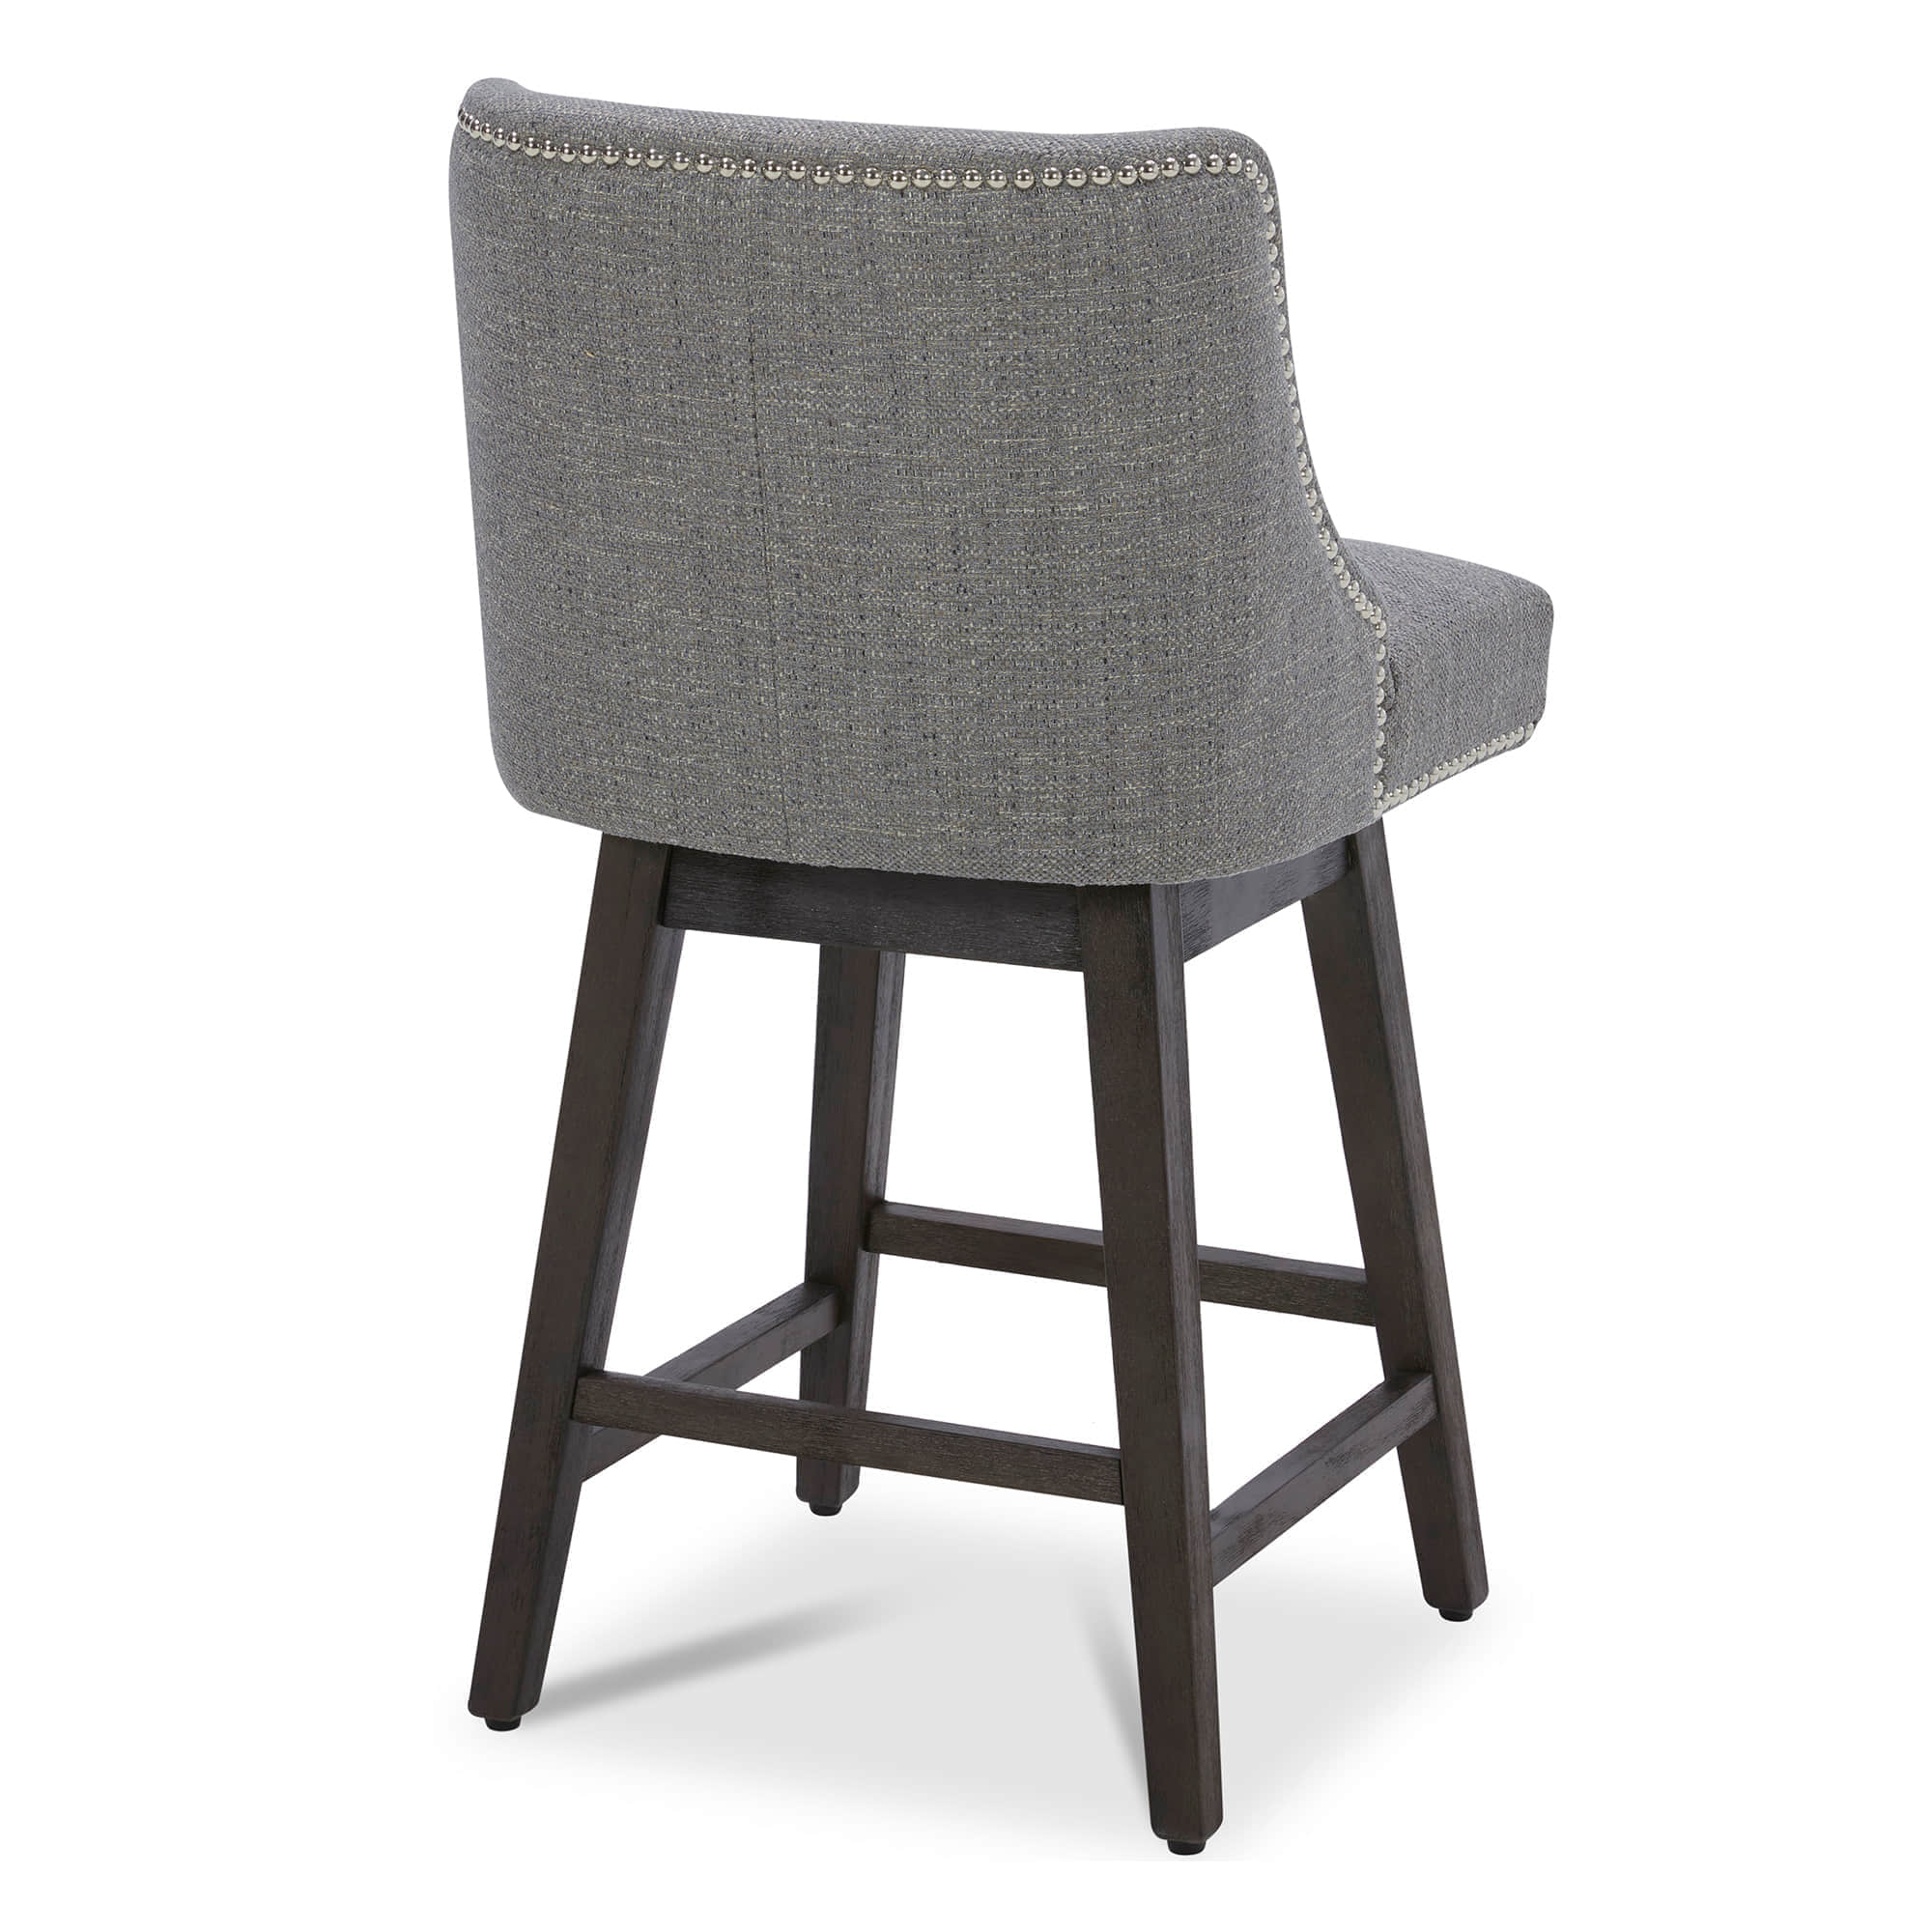 Asher Swivel Counter Stool with Nailhead Trim( Set of 2)